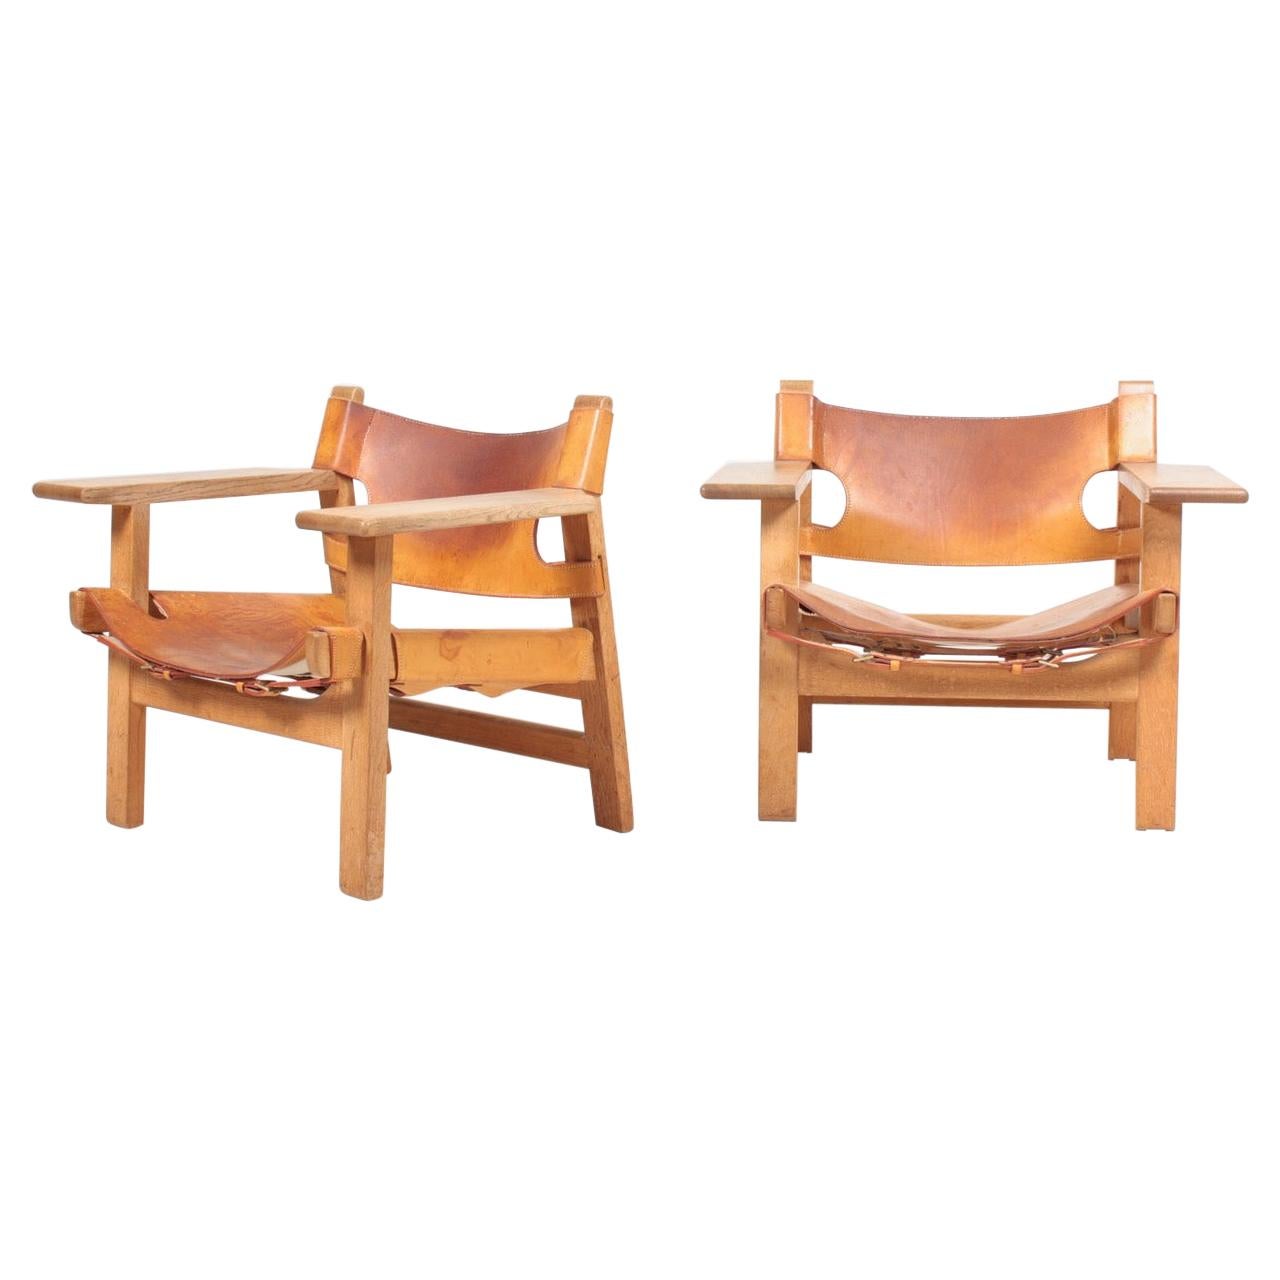 Pair of Spanish Chairs in Patinated Leather and Oak by Børge Mogensen, 1950s